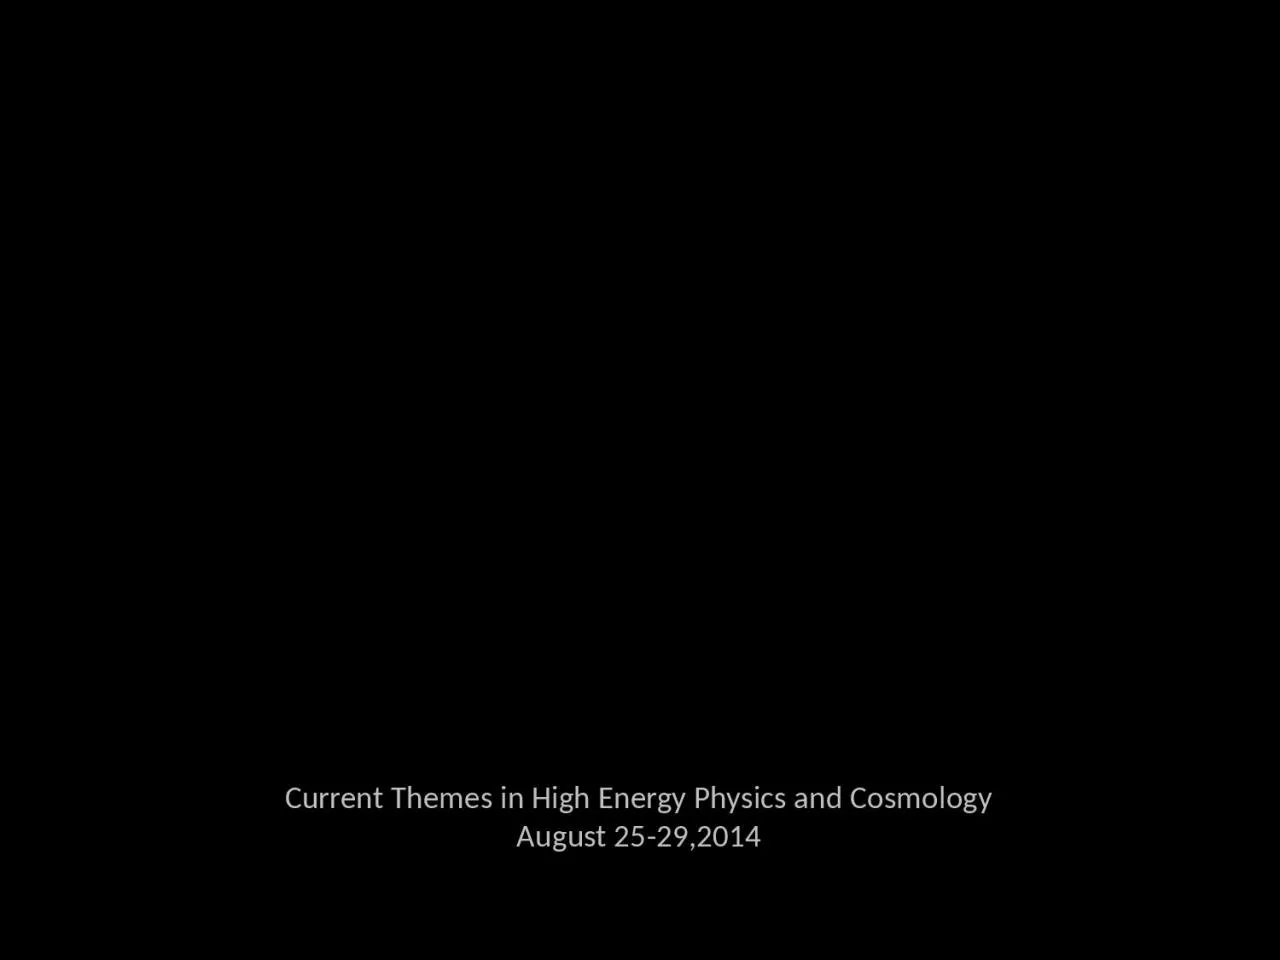 Current Themes in High Energy Physics and Cosmology